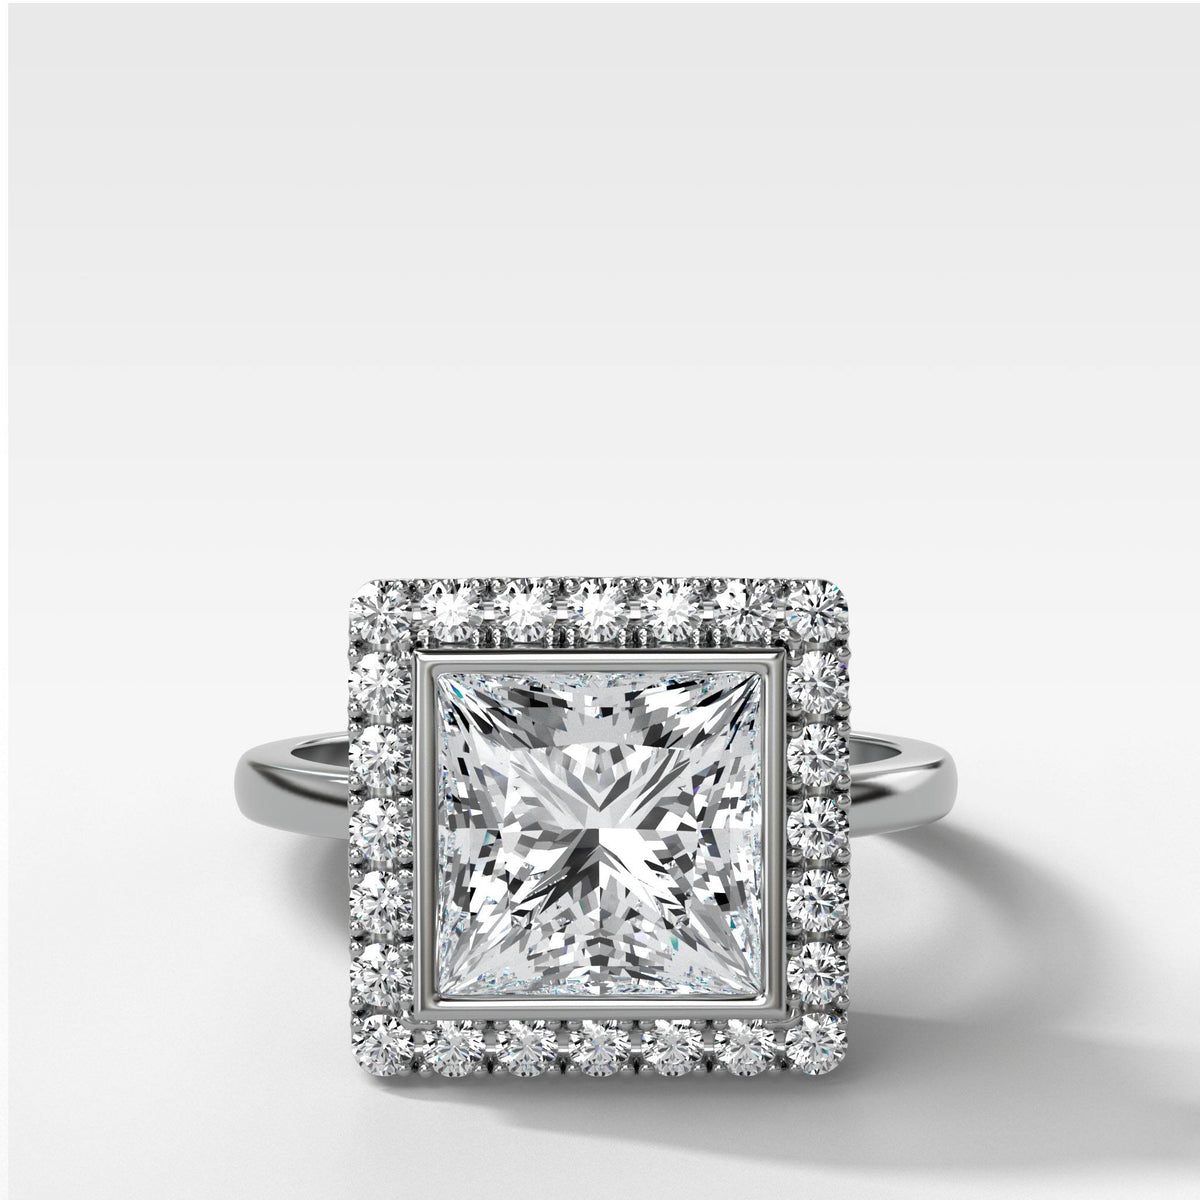 Bezel Set Halo Engagement Ring With Princess Cut by Good Stone in White Gold